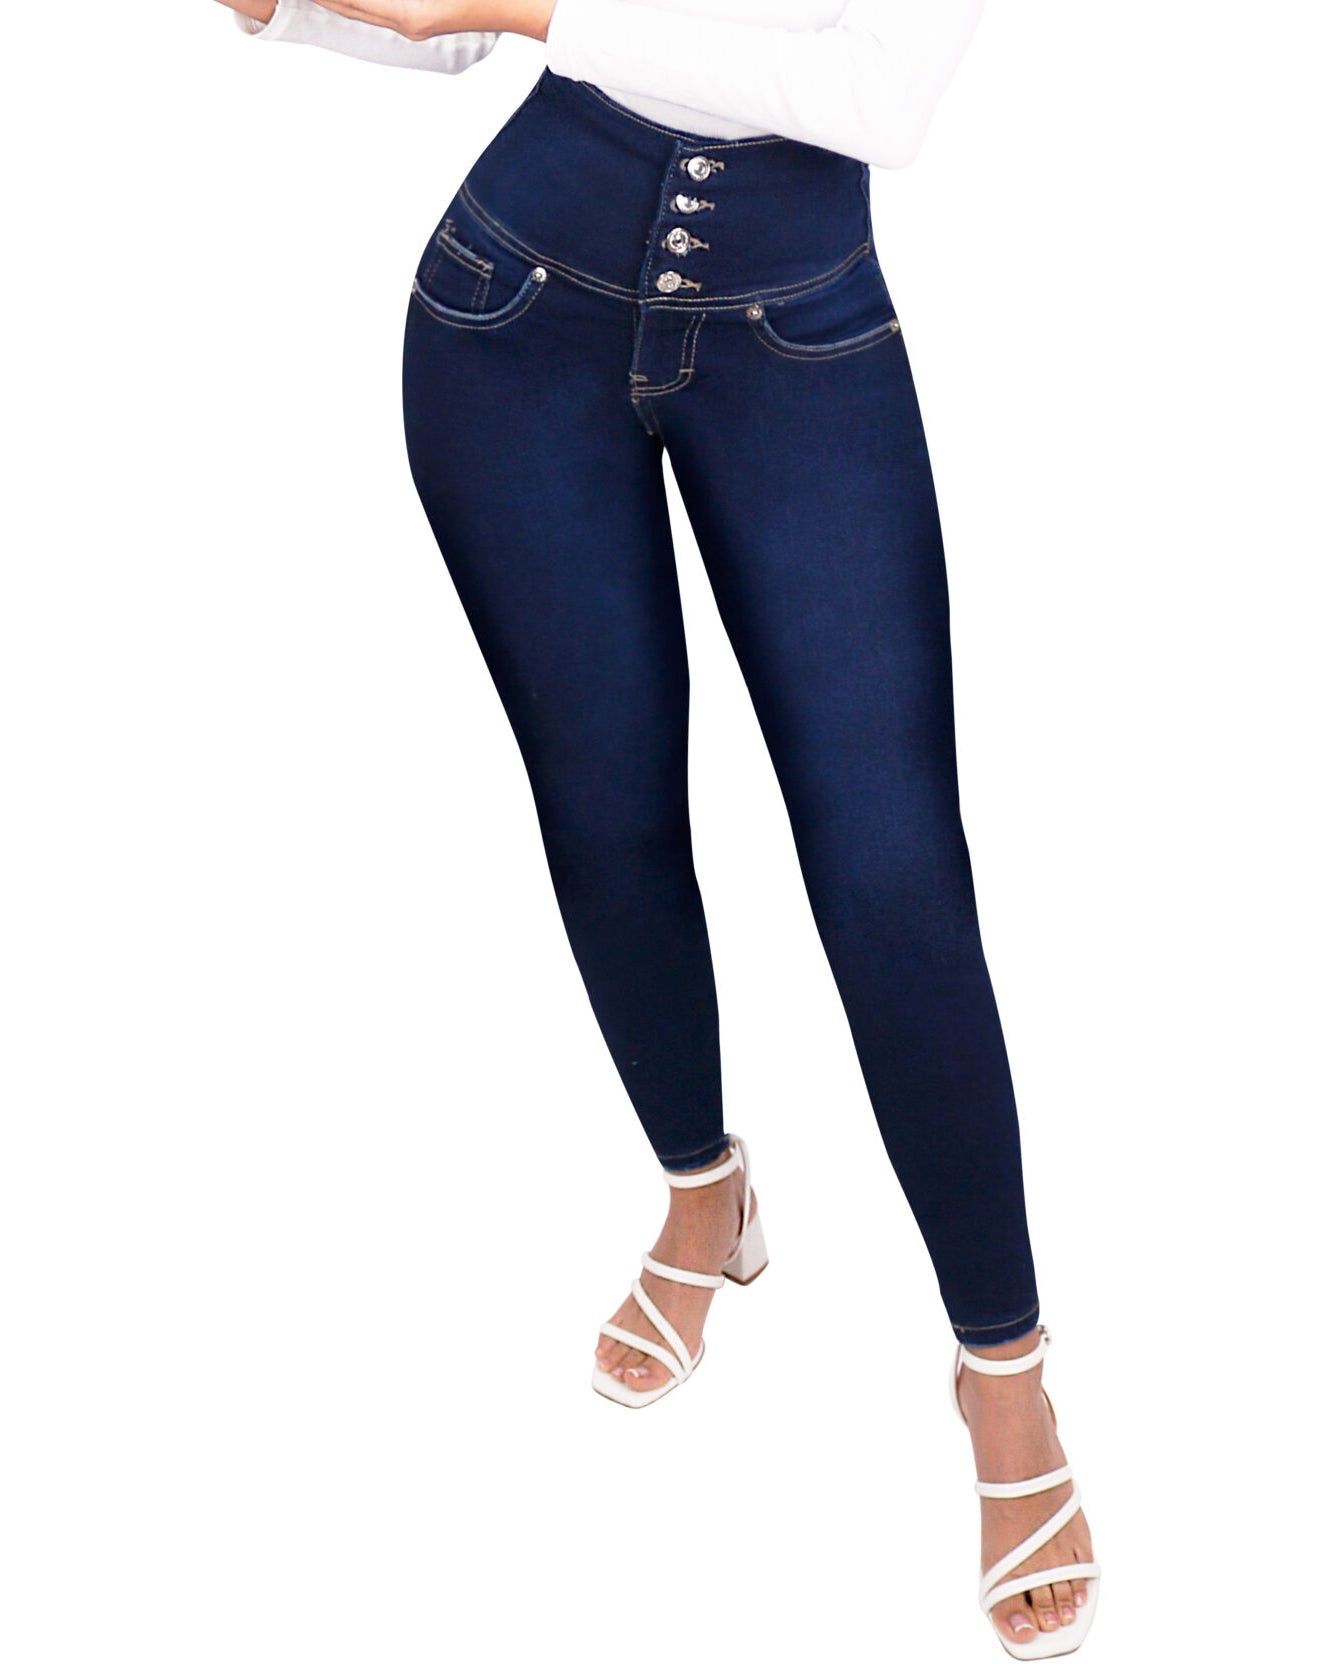 SheCurve® Slimming Jeans With Buttocks, Tummy And Skinny Legs